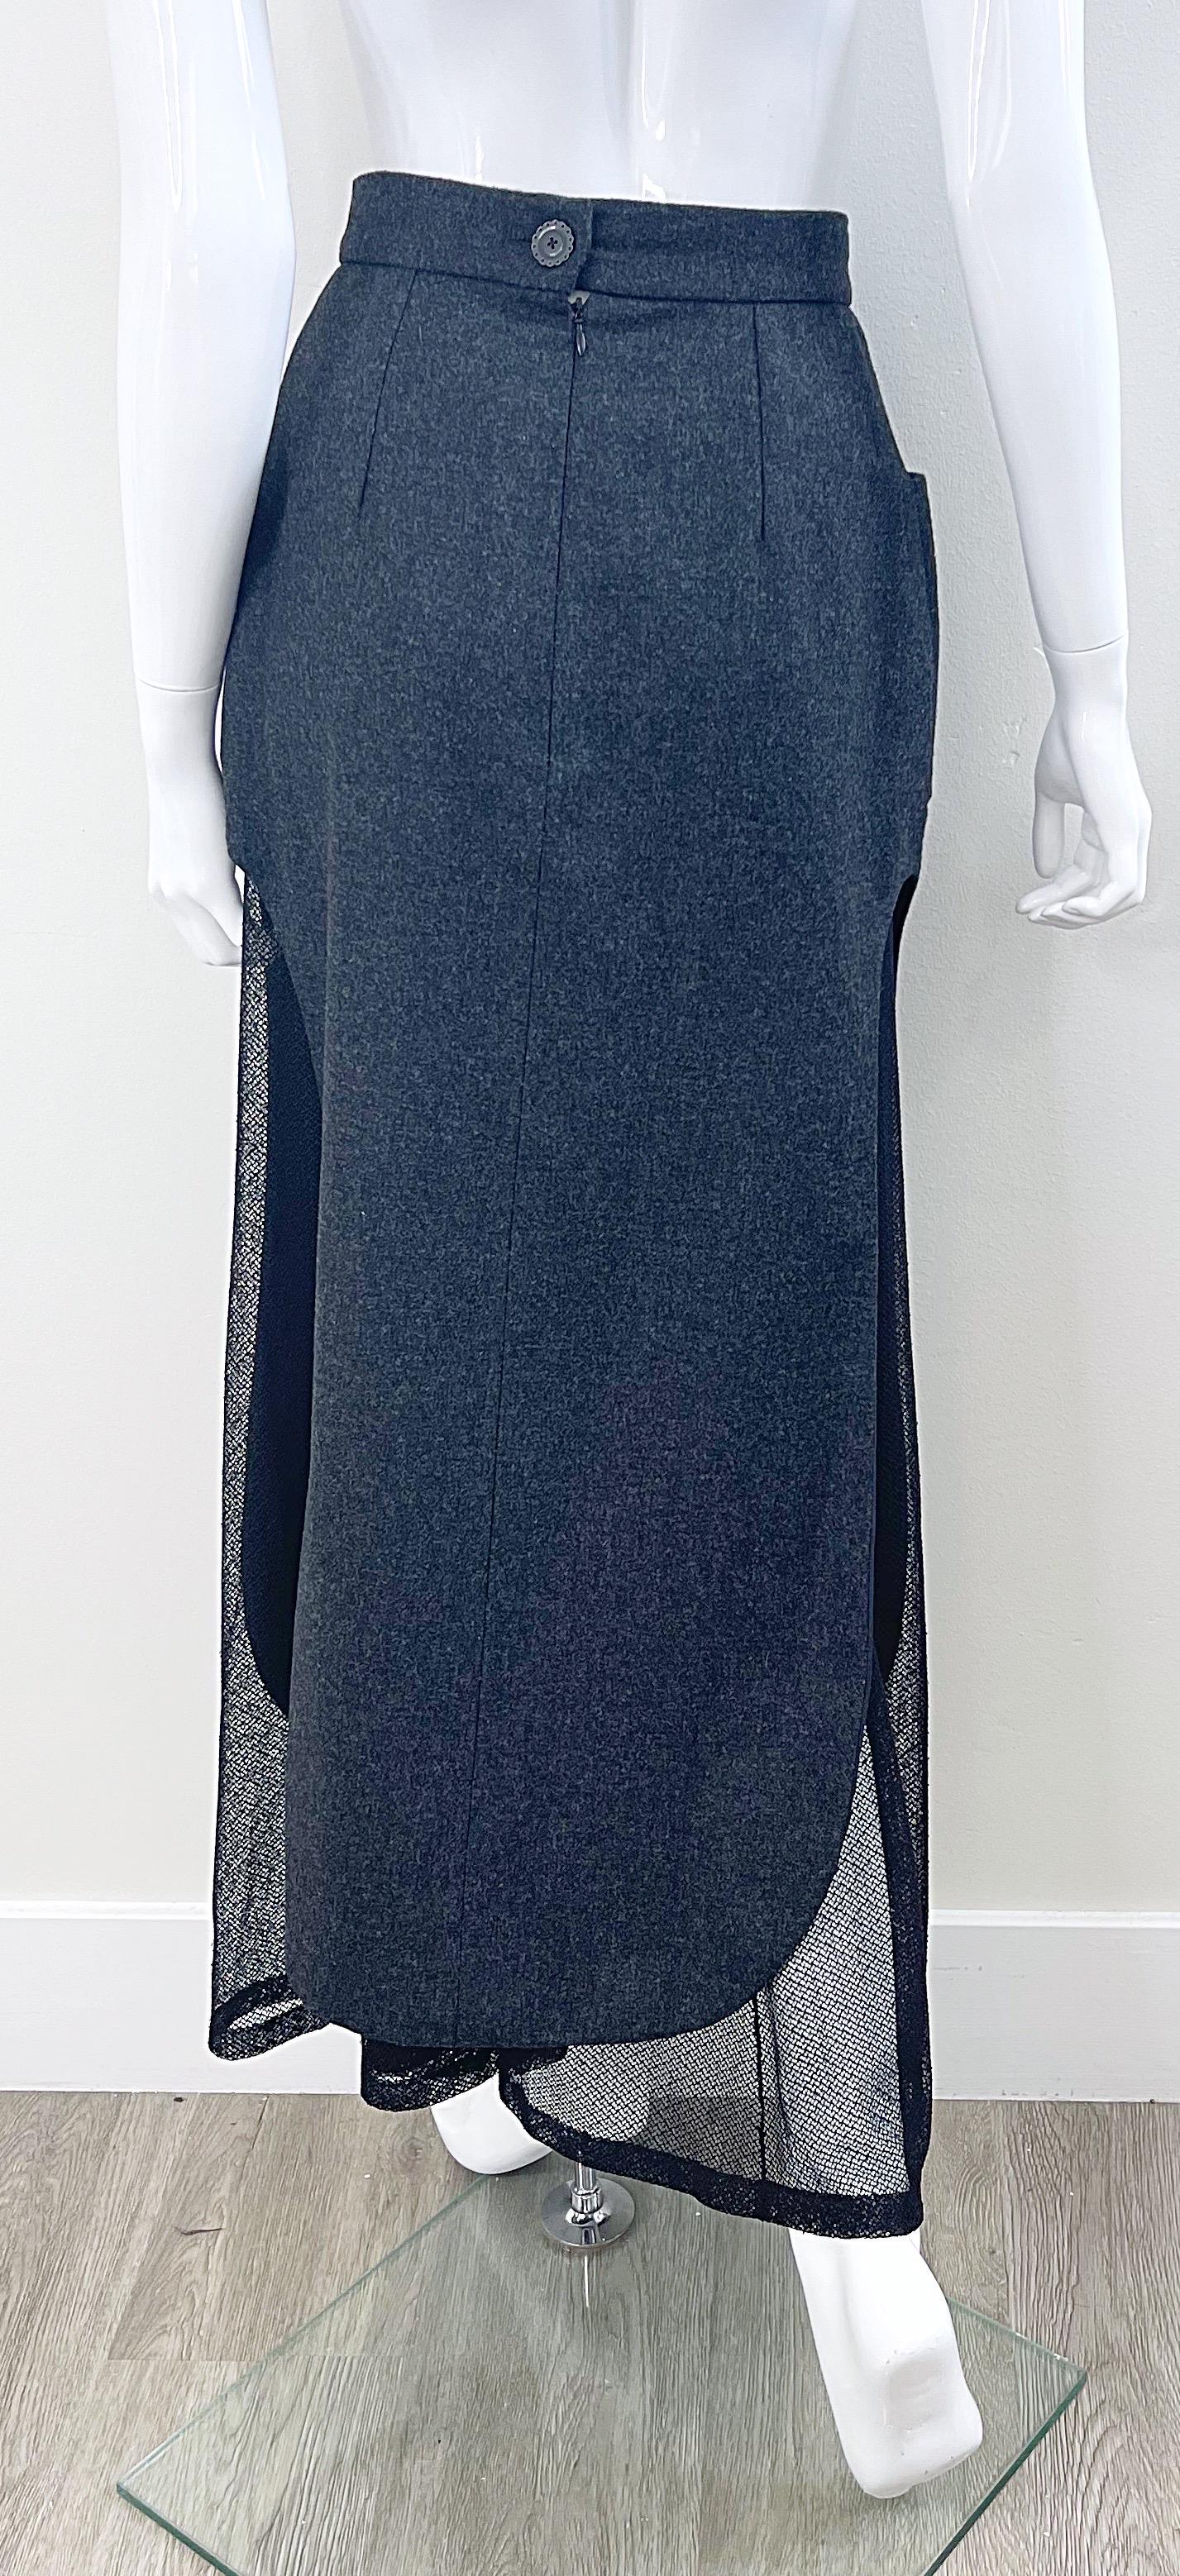 Karl Lagerfeld 1980s Grey Wool + Black Lace Vintage 80s Mini Maxi Skirt For Sale 3